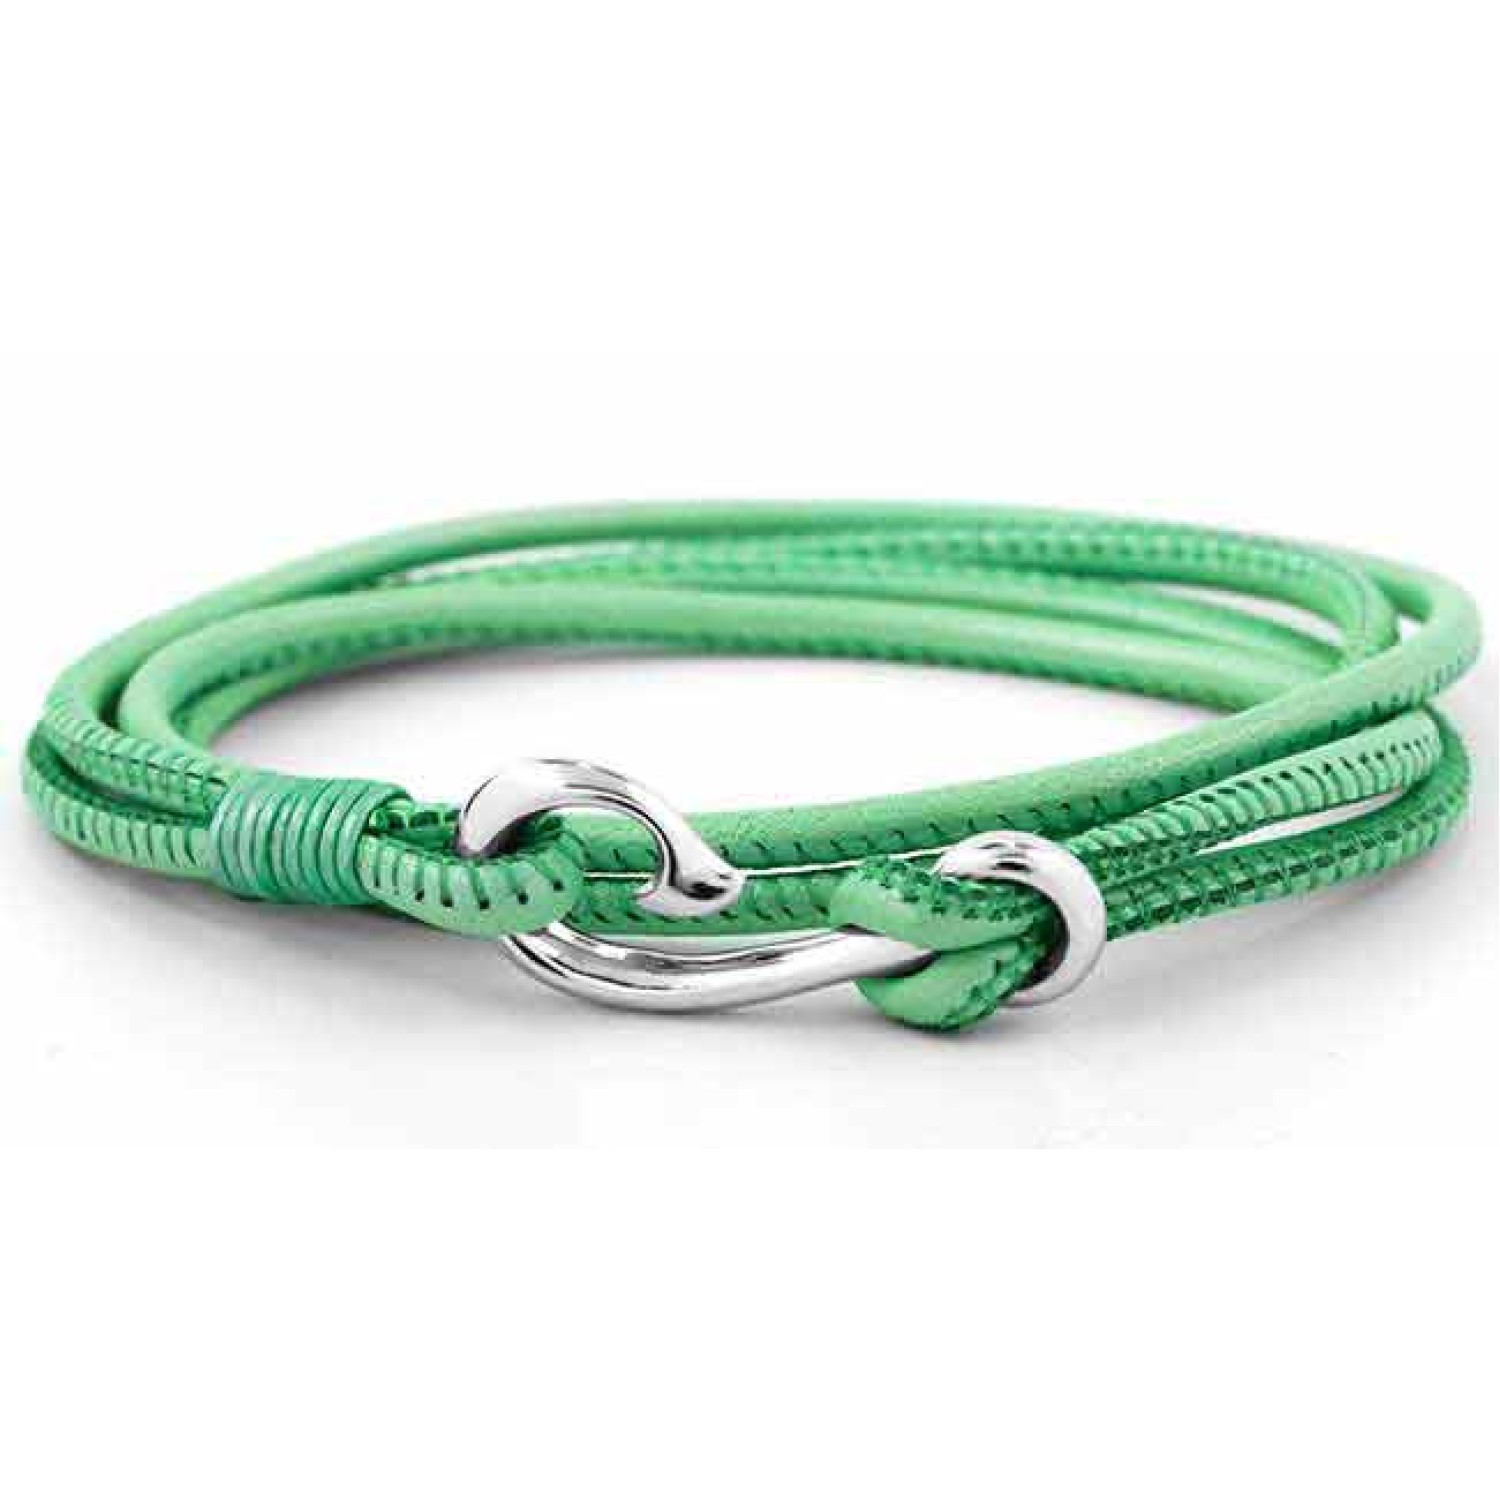 Evolve Safe Travel Wrap Bracelet Teal. The Safe Travel Wrap Bracelet features a sterling silver safe travel hook on soft leather, promising protection and safety as you explore the world. This bracelet wraps around your wrist twice and loops onto the fish